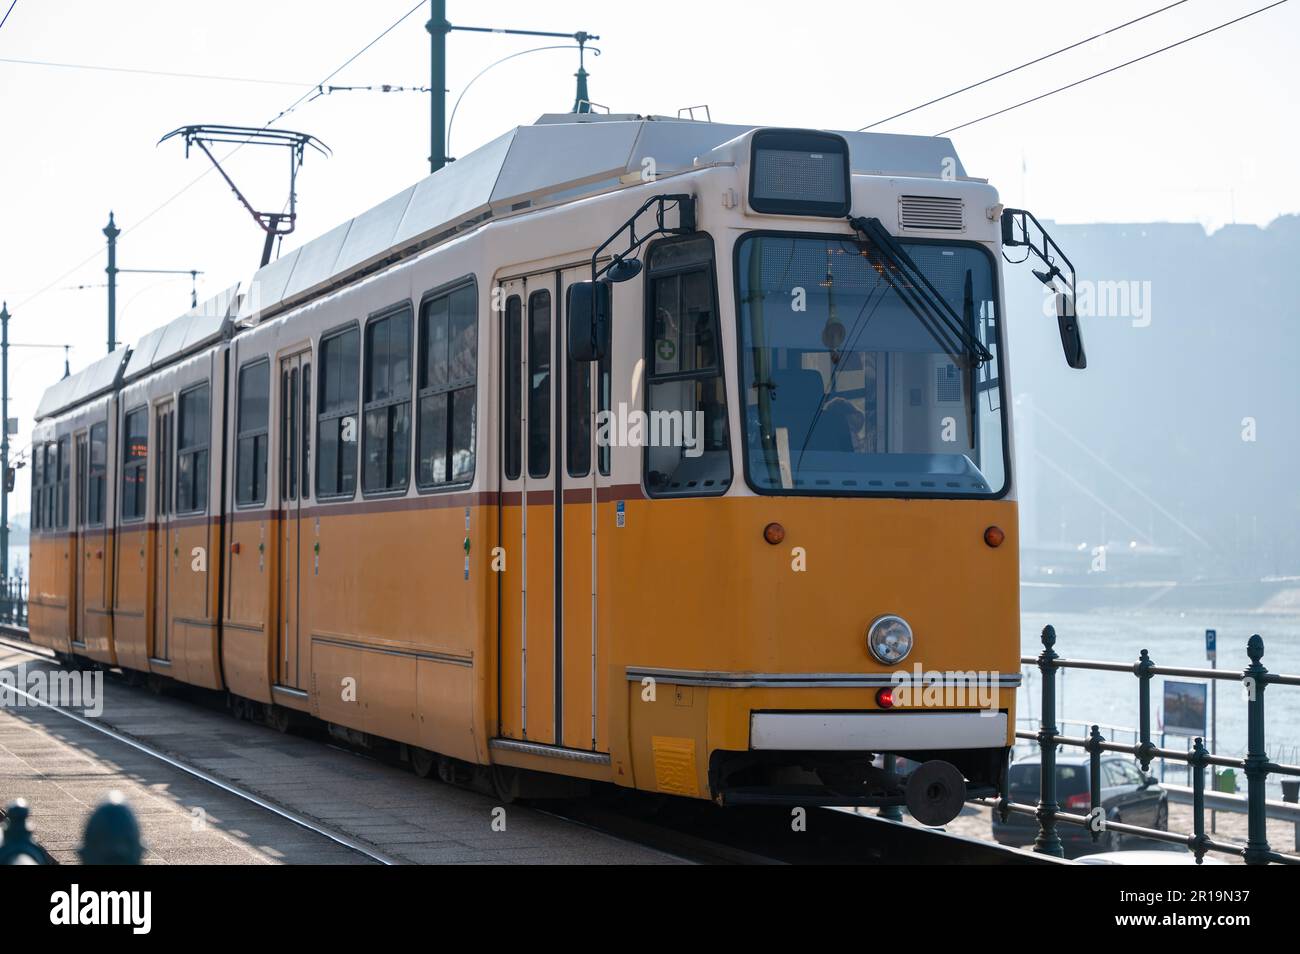 Distinctive yellow and white commuter railway train and carriage in Budapest, Hungary on the banks of the River Danube Stock Photo